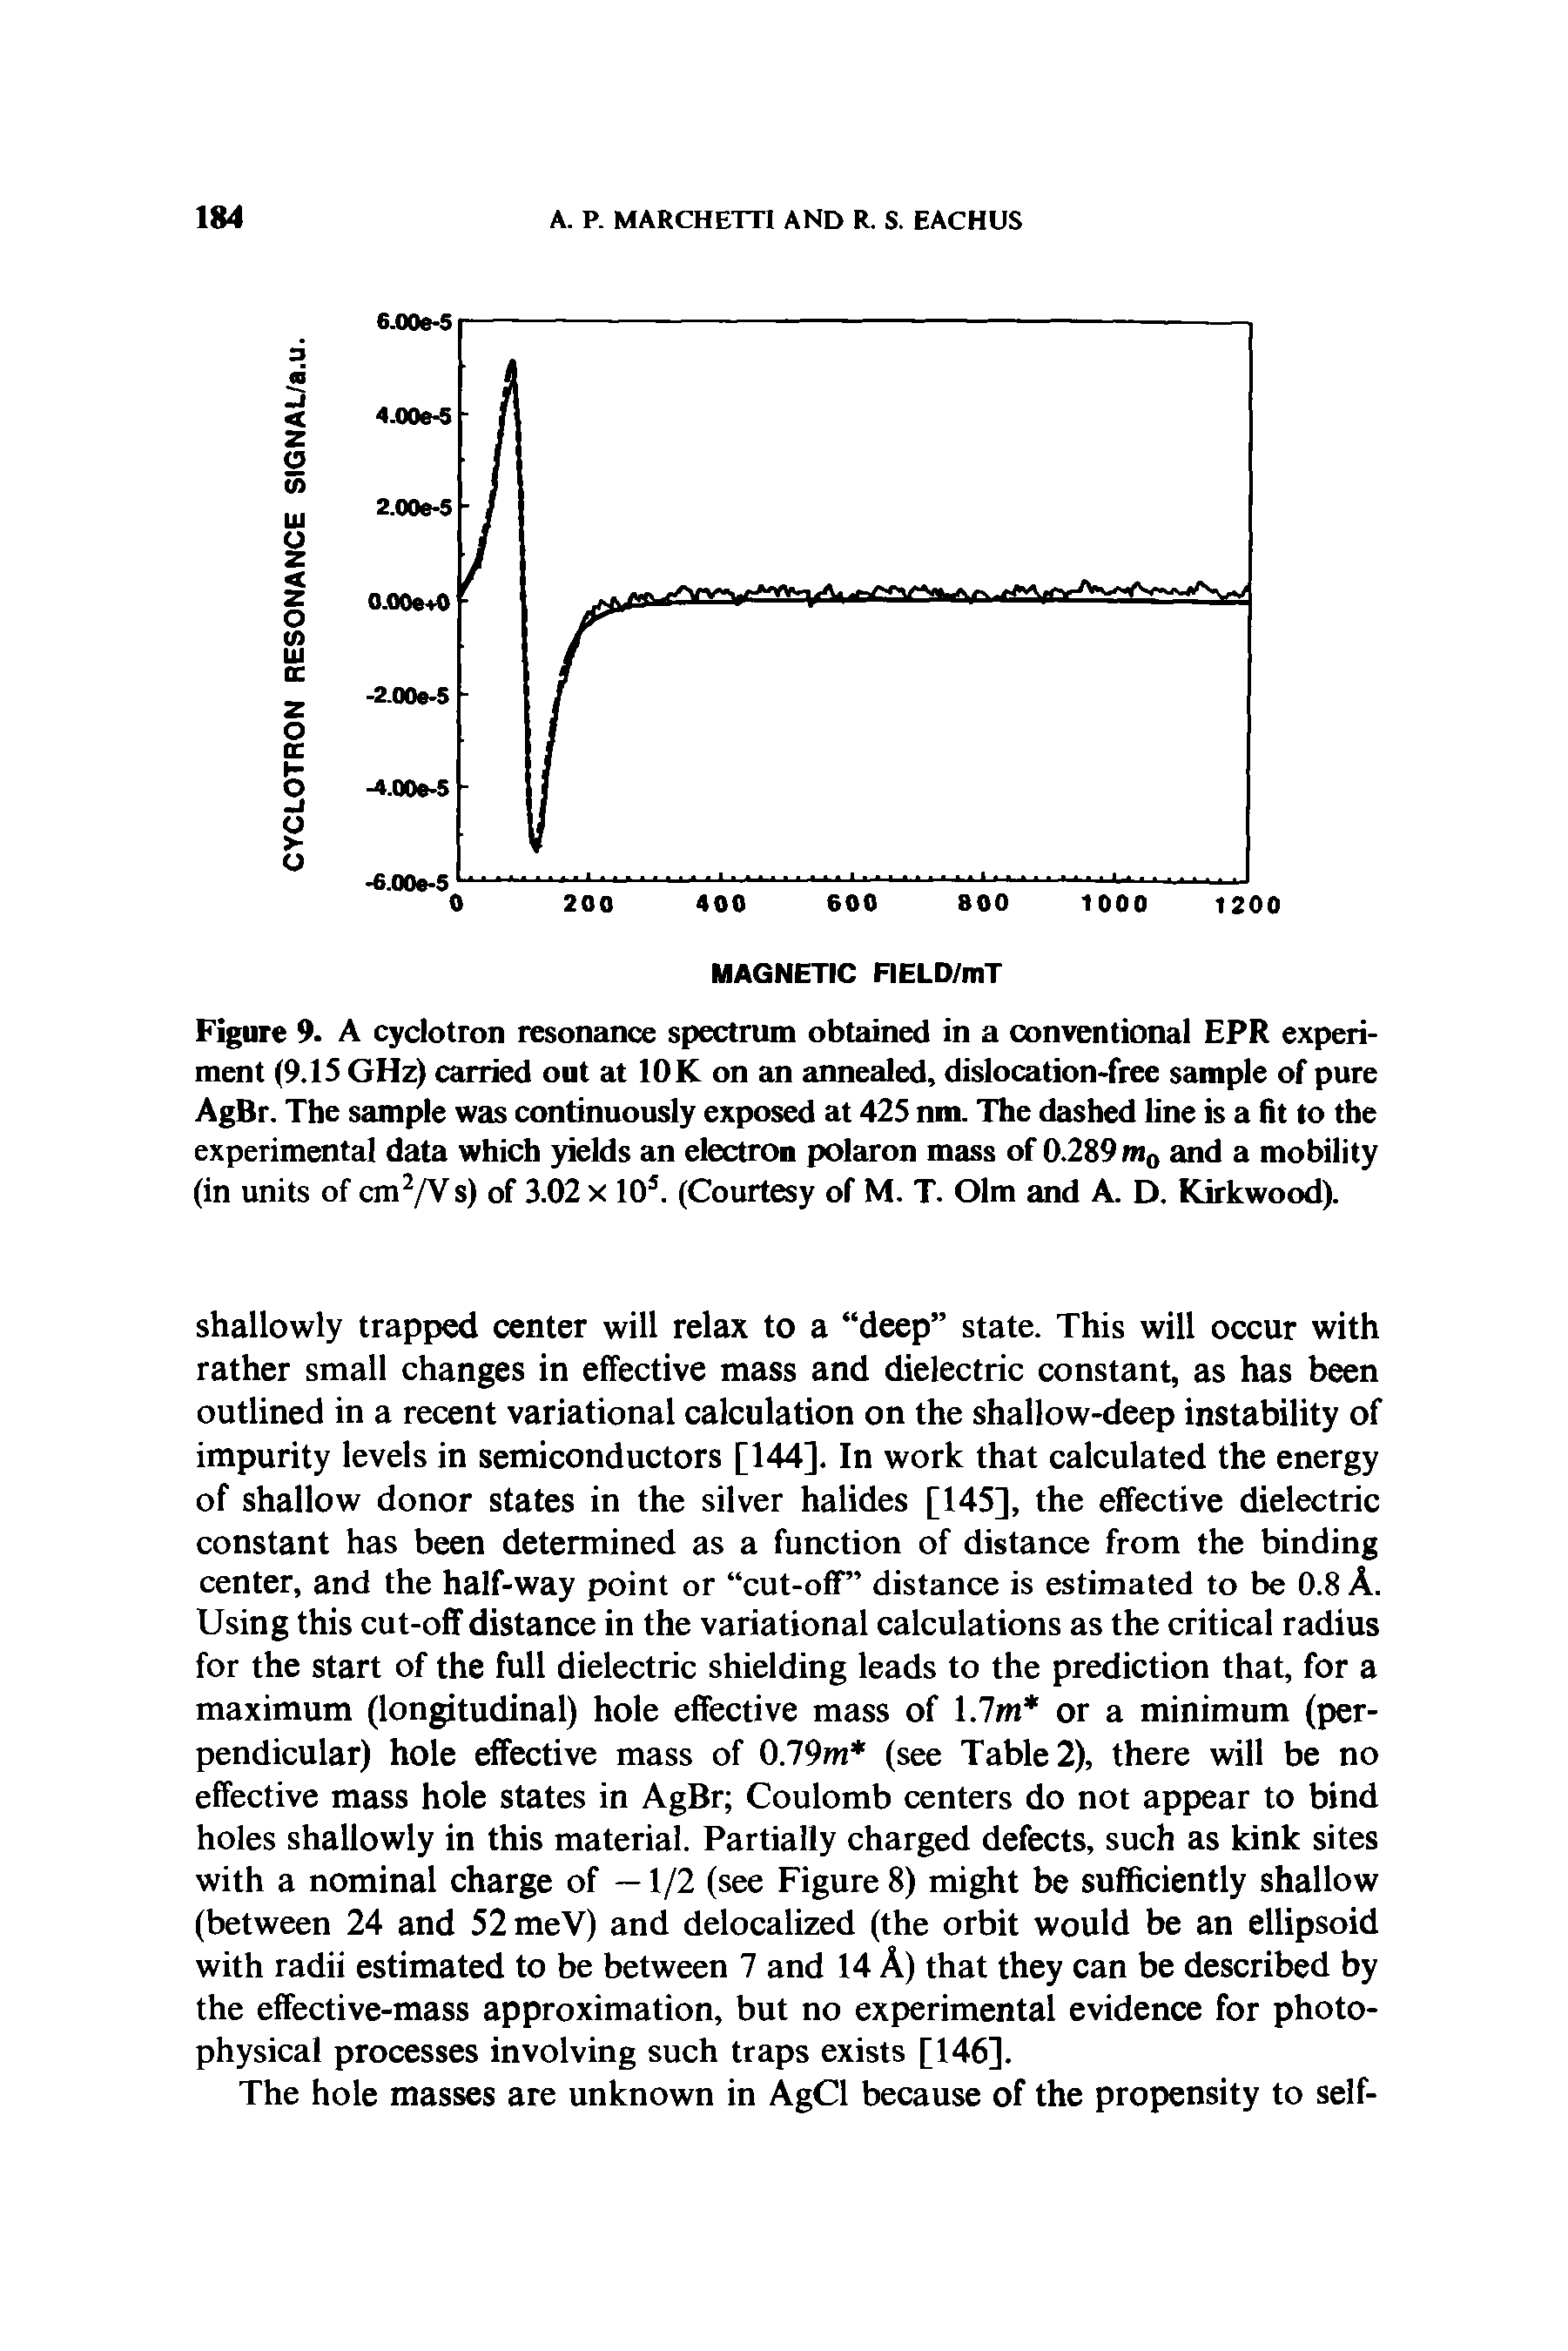 Figure 9. A cyclotron resonance spectrum obtained in a conventional EPR experiment (9.15 GHz) carried out at 10K on an annealed, dislocation-free sample of pure AgBr. The sample was continuously exposed at 425 nm. The dashed line is a fit to the experimental data which yields an electron polaron mass of 0.289m0 and a mobility (in units of cm2/Vs) of 3.02 x 105. (Courtesy of M. T. Olm and A. D. Kirkwood).